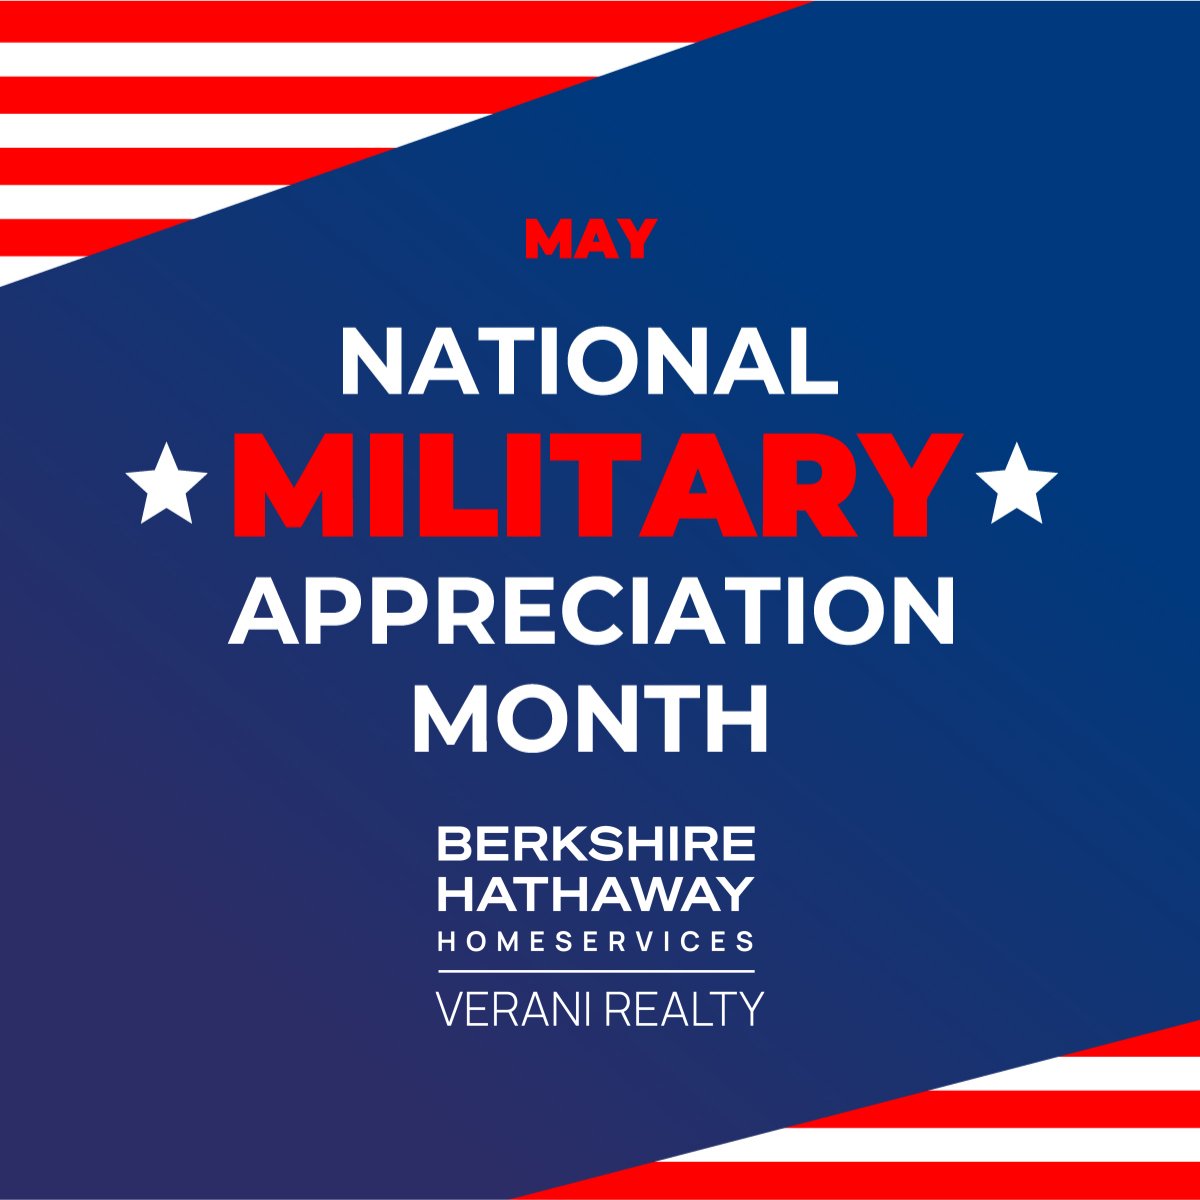 May is National Military Appreciation Month. A chance for the nation to show appreciation for troops past and present. Happy Military Appreciation Month!

#Military Appreciation

#BHHS
#BHHSRealEstate
#BHHSVeraniRealty
#NHRealtor
#NHRealEstate
#ForeverAgent
#TeamYJ